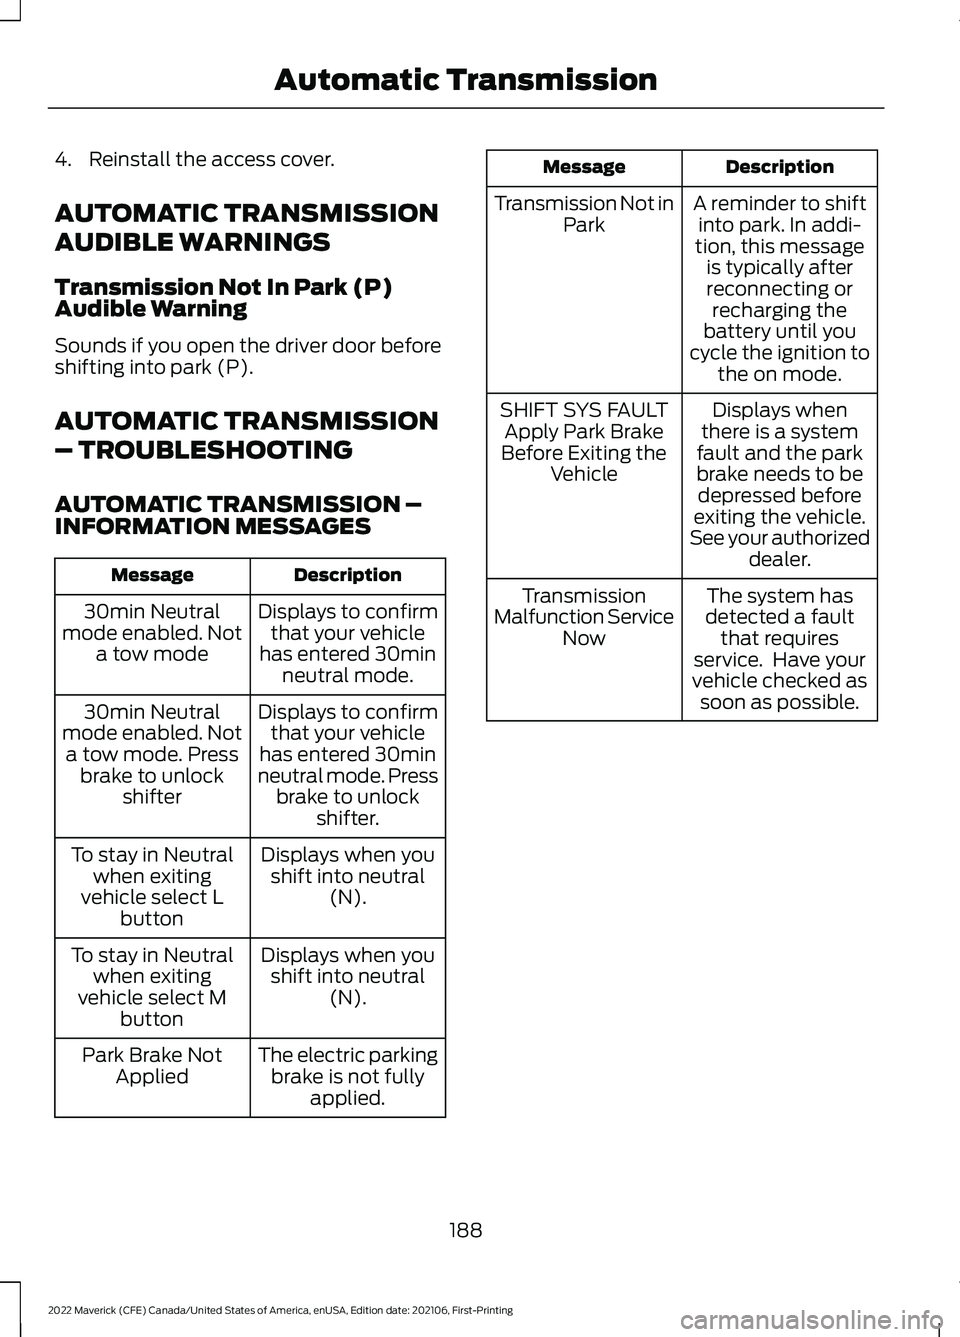 FORD MAVERICK 2022 User Guide 4. Reinstall the access cover.
AUTOMATIC TRANSMISSION
AUDIBLE WARNINGS
Transmission Not In Park (P)
Audible Warning
Sounds if you open the driver door before
shifting into park (P).
AUTOMATIC TRANSMIS